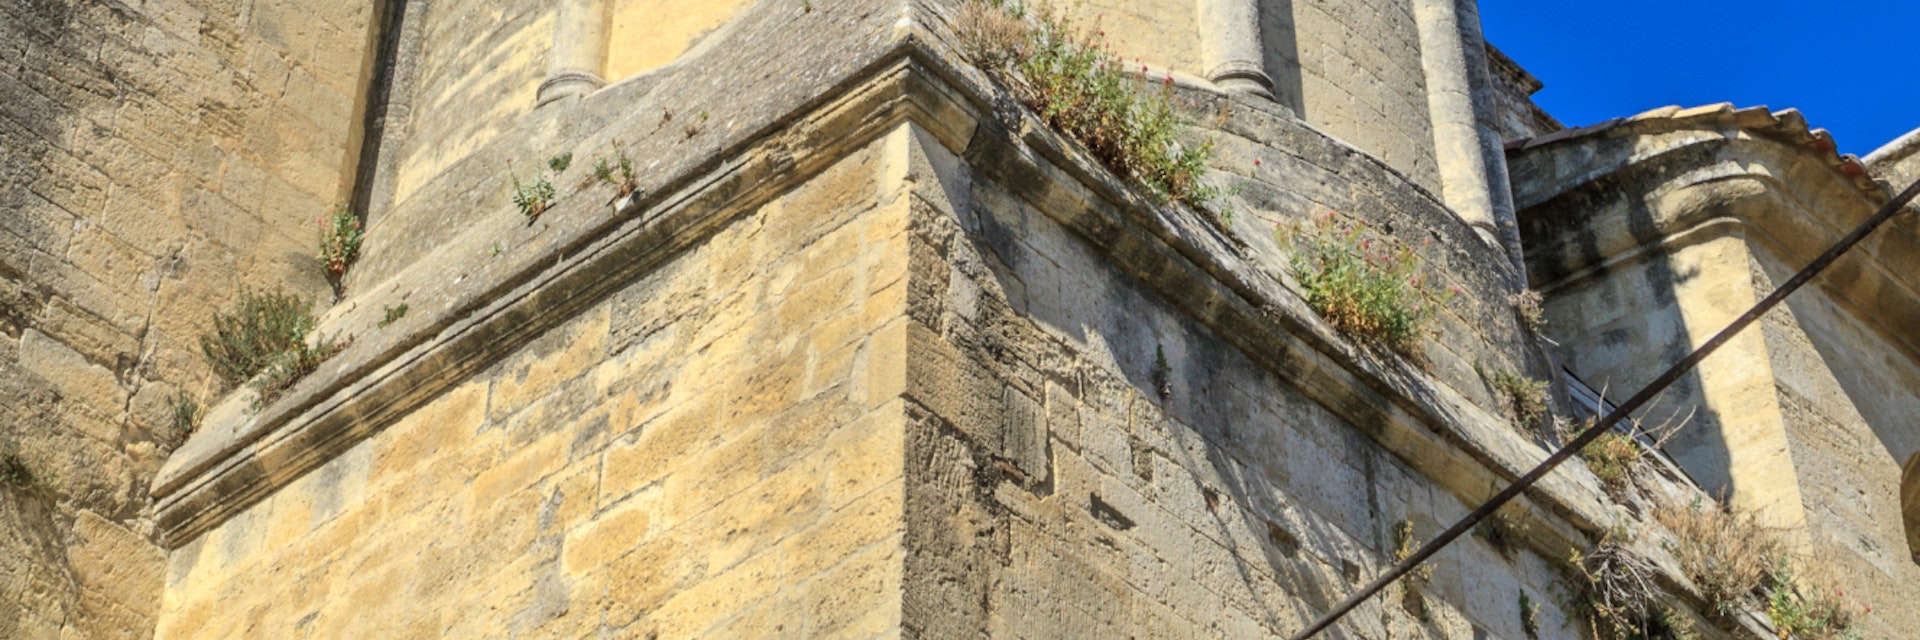 Uzes, Fenestrelle Tower, Cathedral of St. Theodore, Languedoc Roussillon, France; Shutterstock ID 119161549; Your name (First / Last): Daniel Fahey; GL account no.: 65050; Netsuite department name: Online Editorial; Full Product or Project name including edition: Cathédrale St-Théodont POI